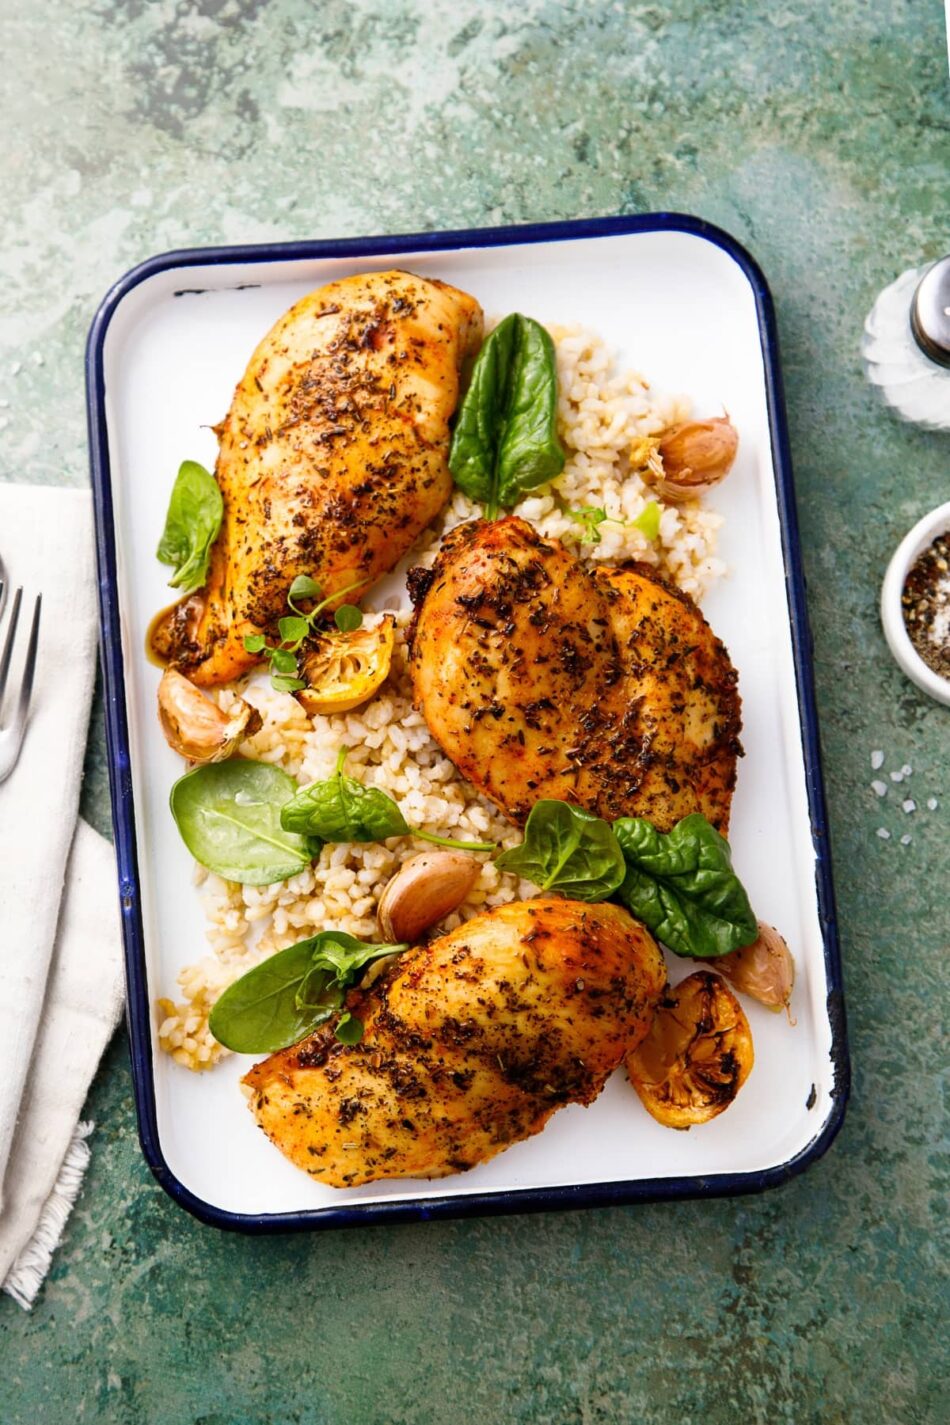 17 Bone-In Chicken Breast Recipes to Make for Dinner